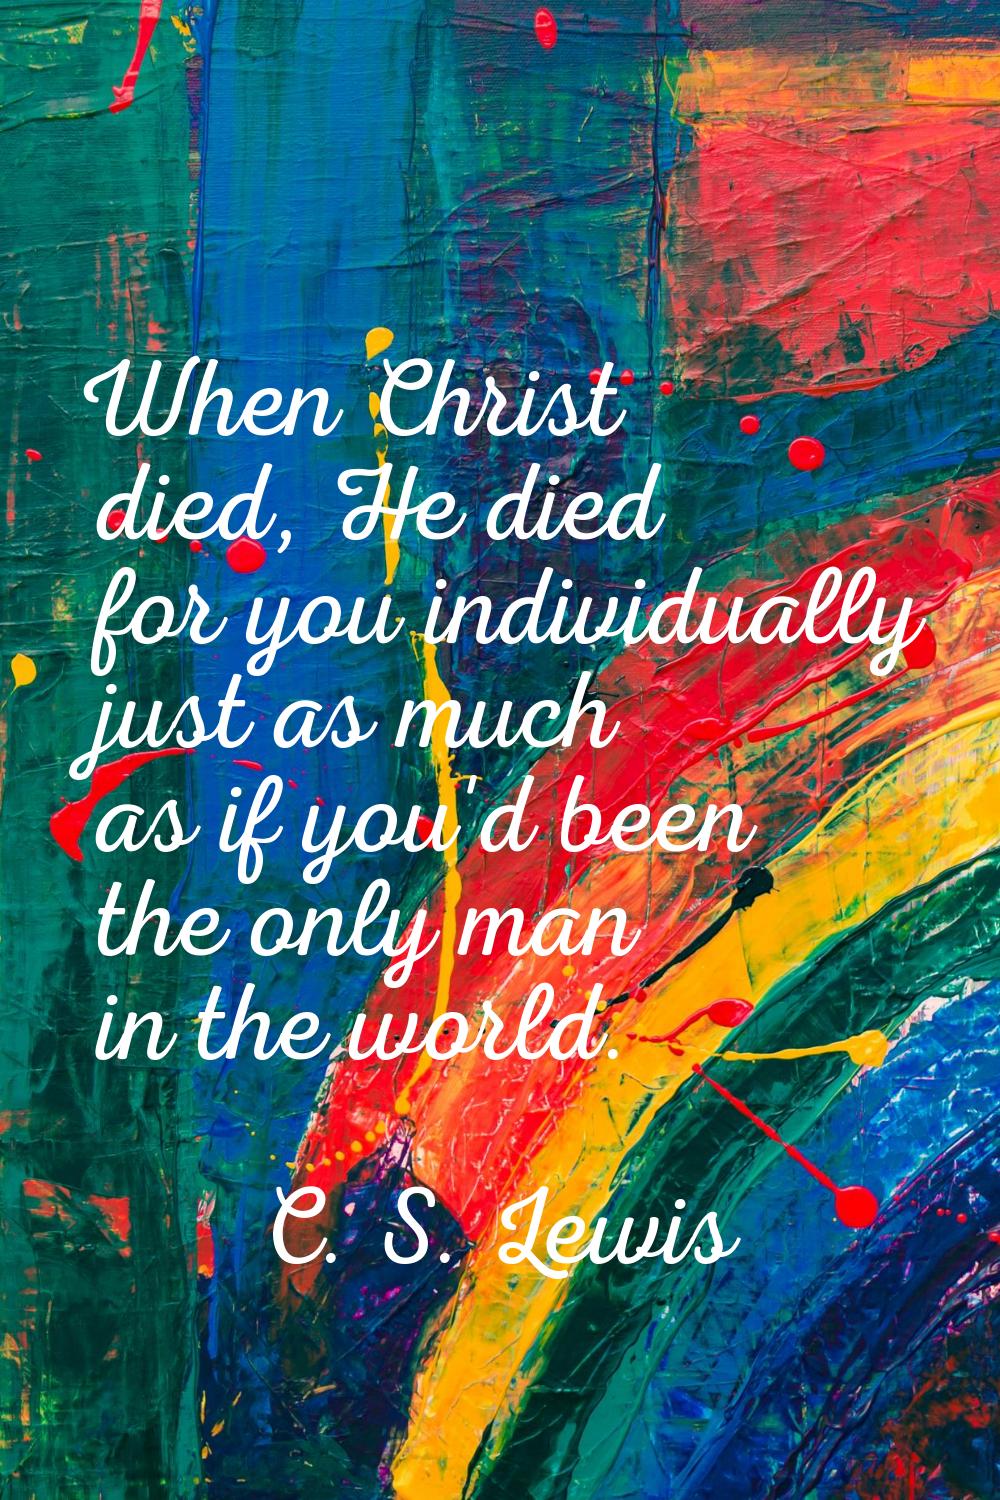 When Christ died, He died for you individually just as much as if you'd been the only man in the wo